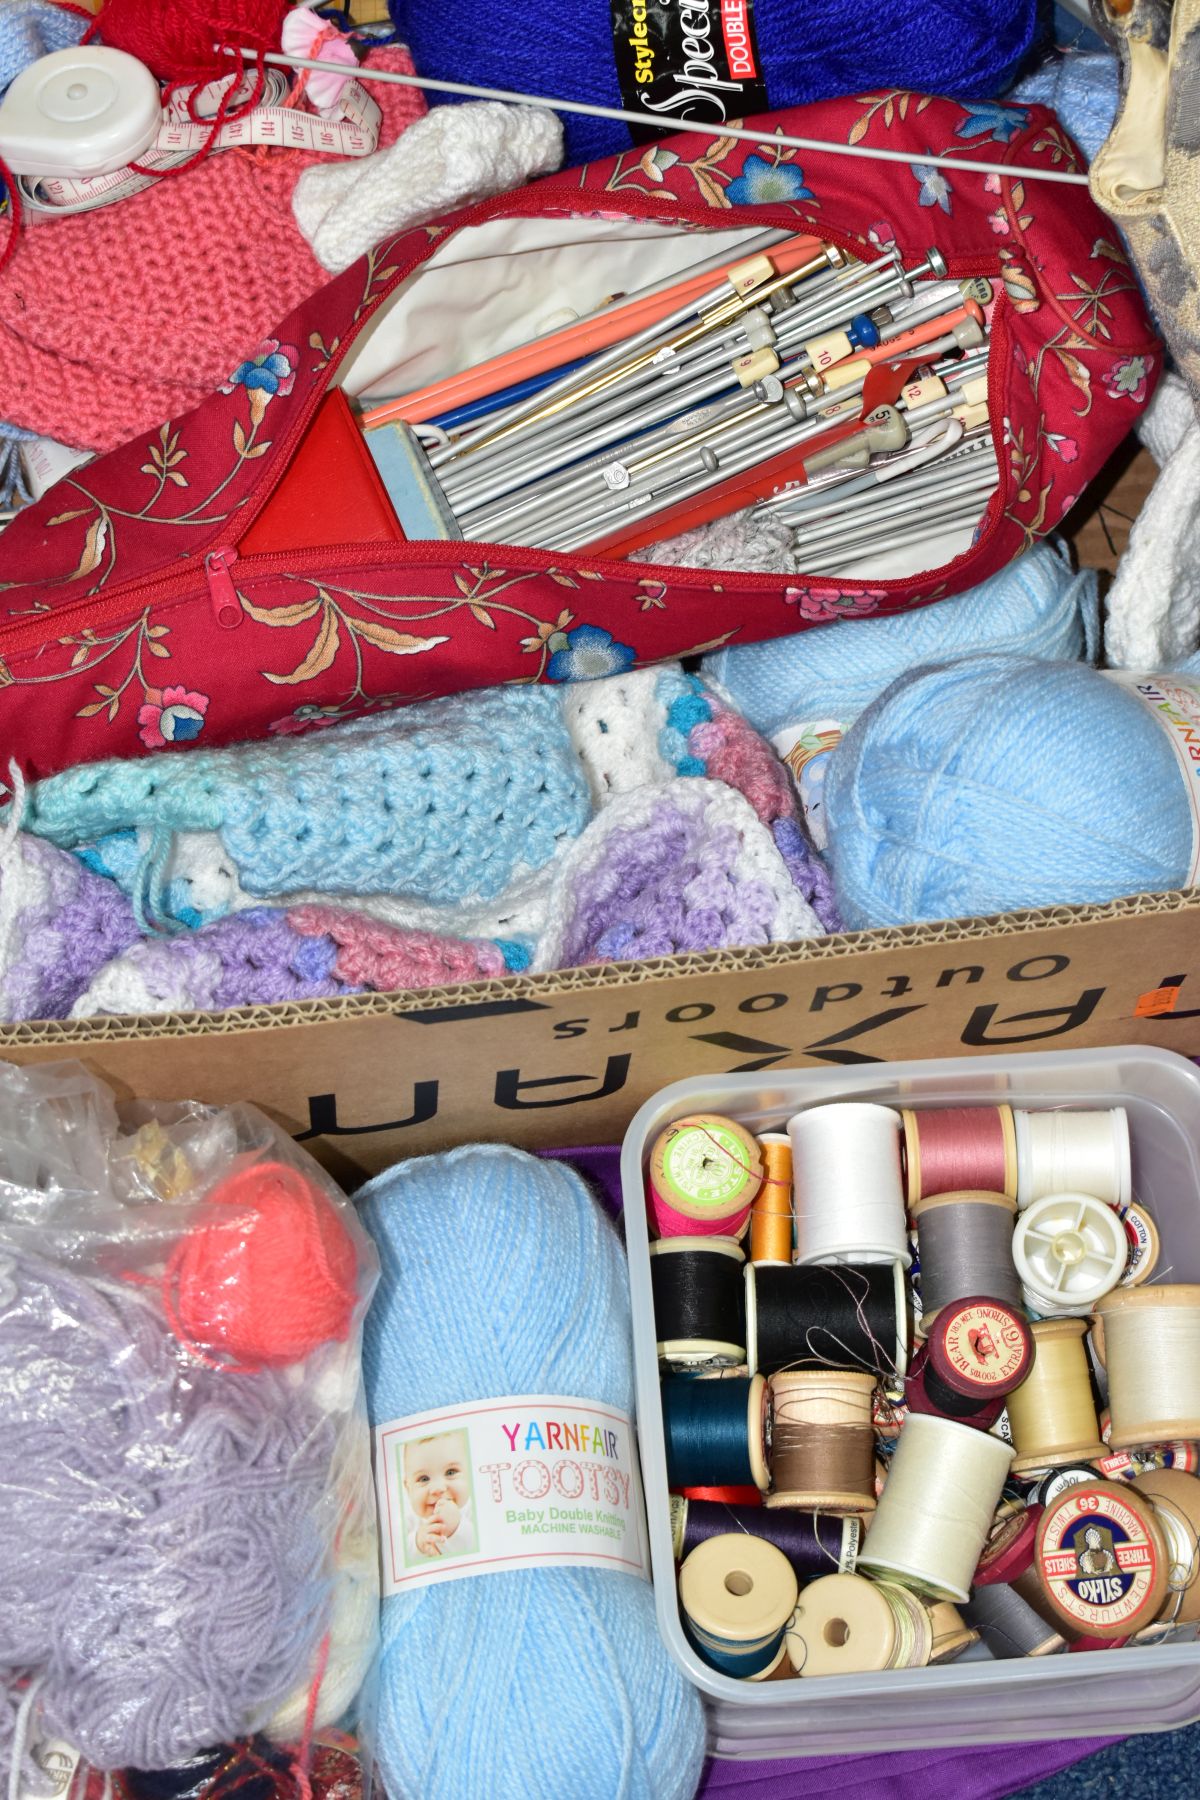 FIVE BOXES OF WOOL, KNITTING NEEDLES, BEDDING AND KNITWARE, the knitware looks to be homemade, the - Image 3 of 3